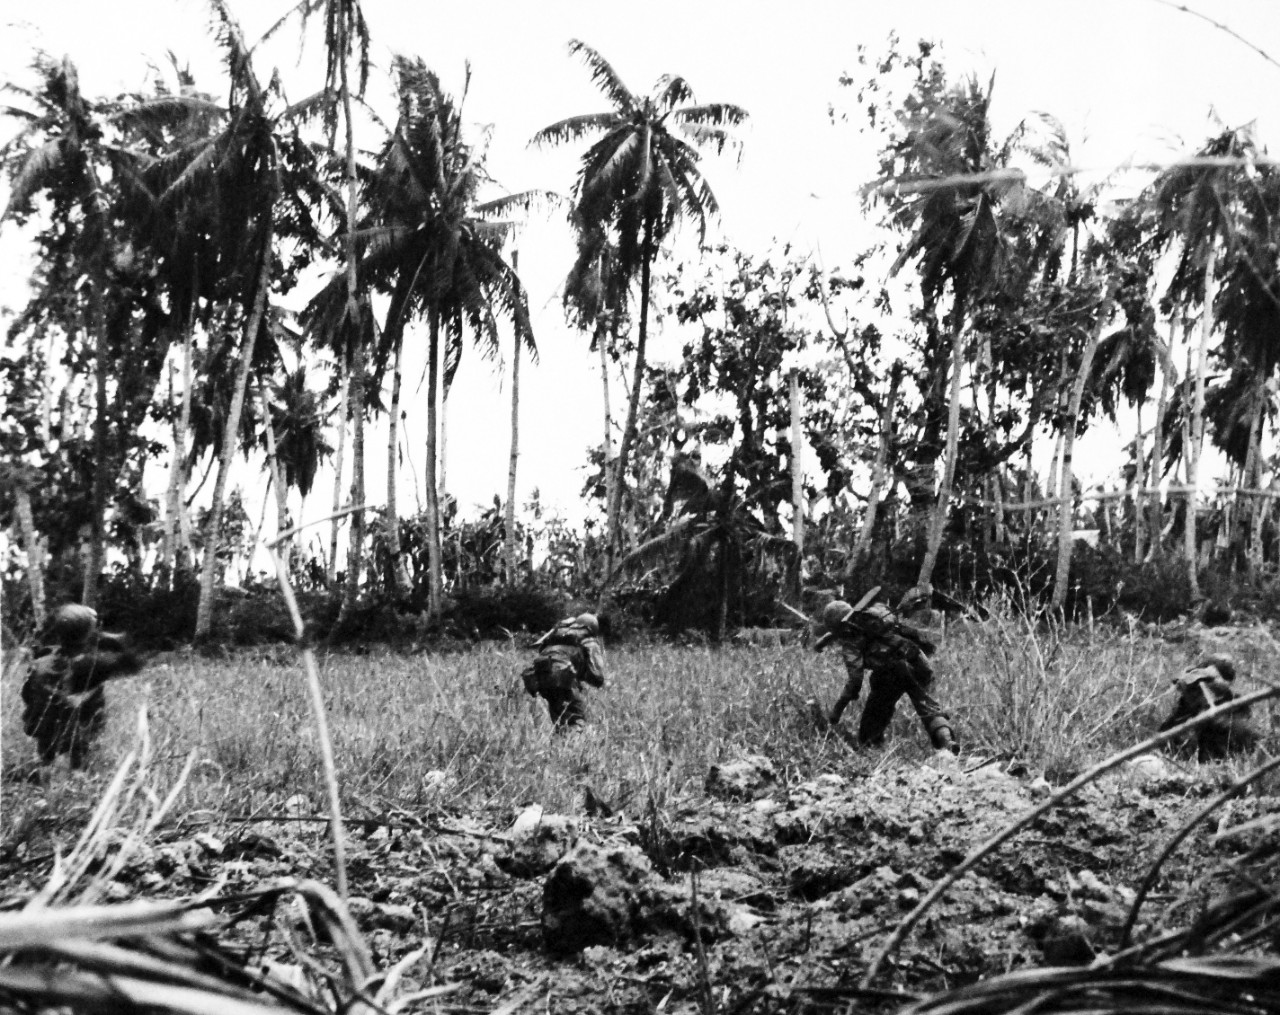 80-G-239420:  Invasion of Guam, July 21-August 10, 1944.   U.S. Marine Corps hurling hand grenades at Japanese troops on the other side of a Guam rice paddy, released August 3, 1944.    Official U.S. Navy Photograph, now in the collections of the National Archives.  (2017/03/07).